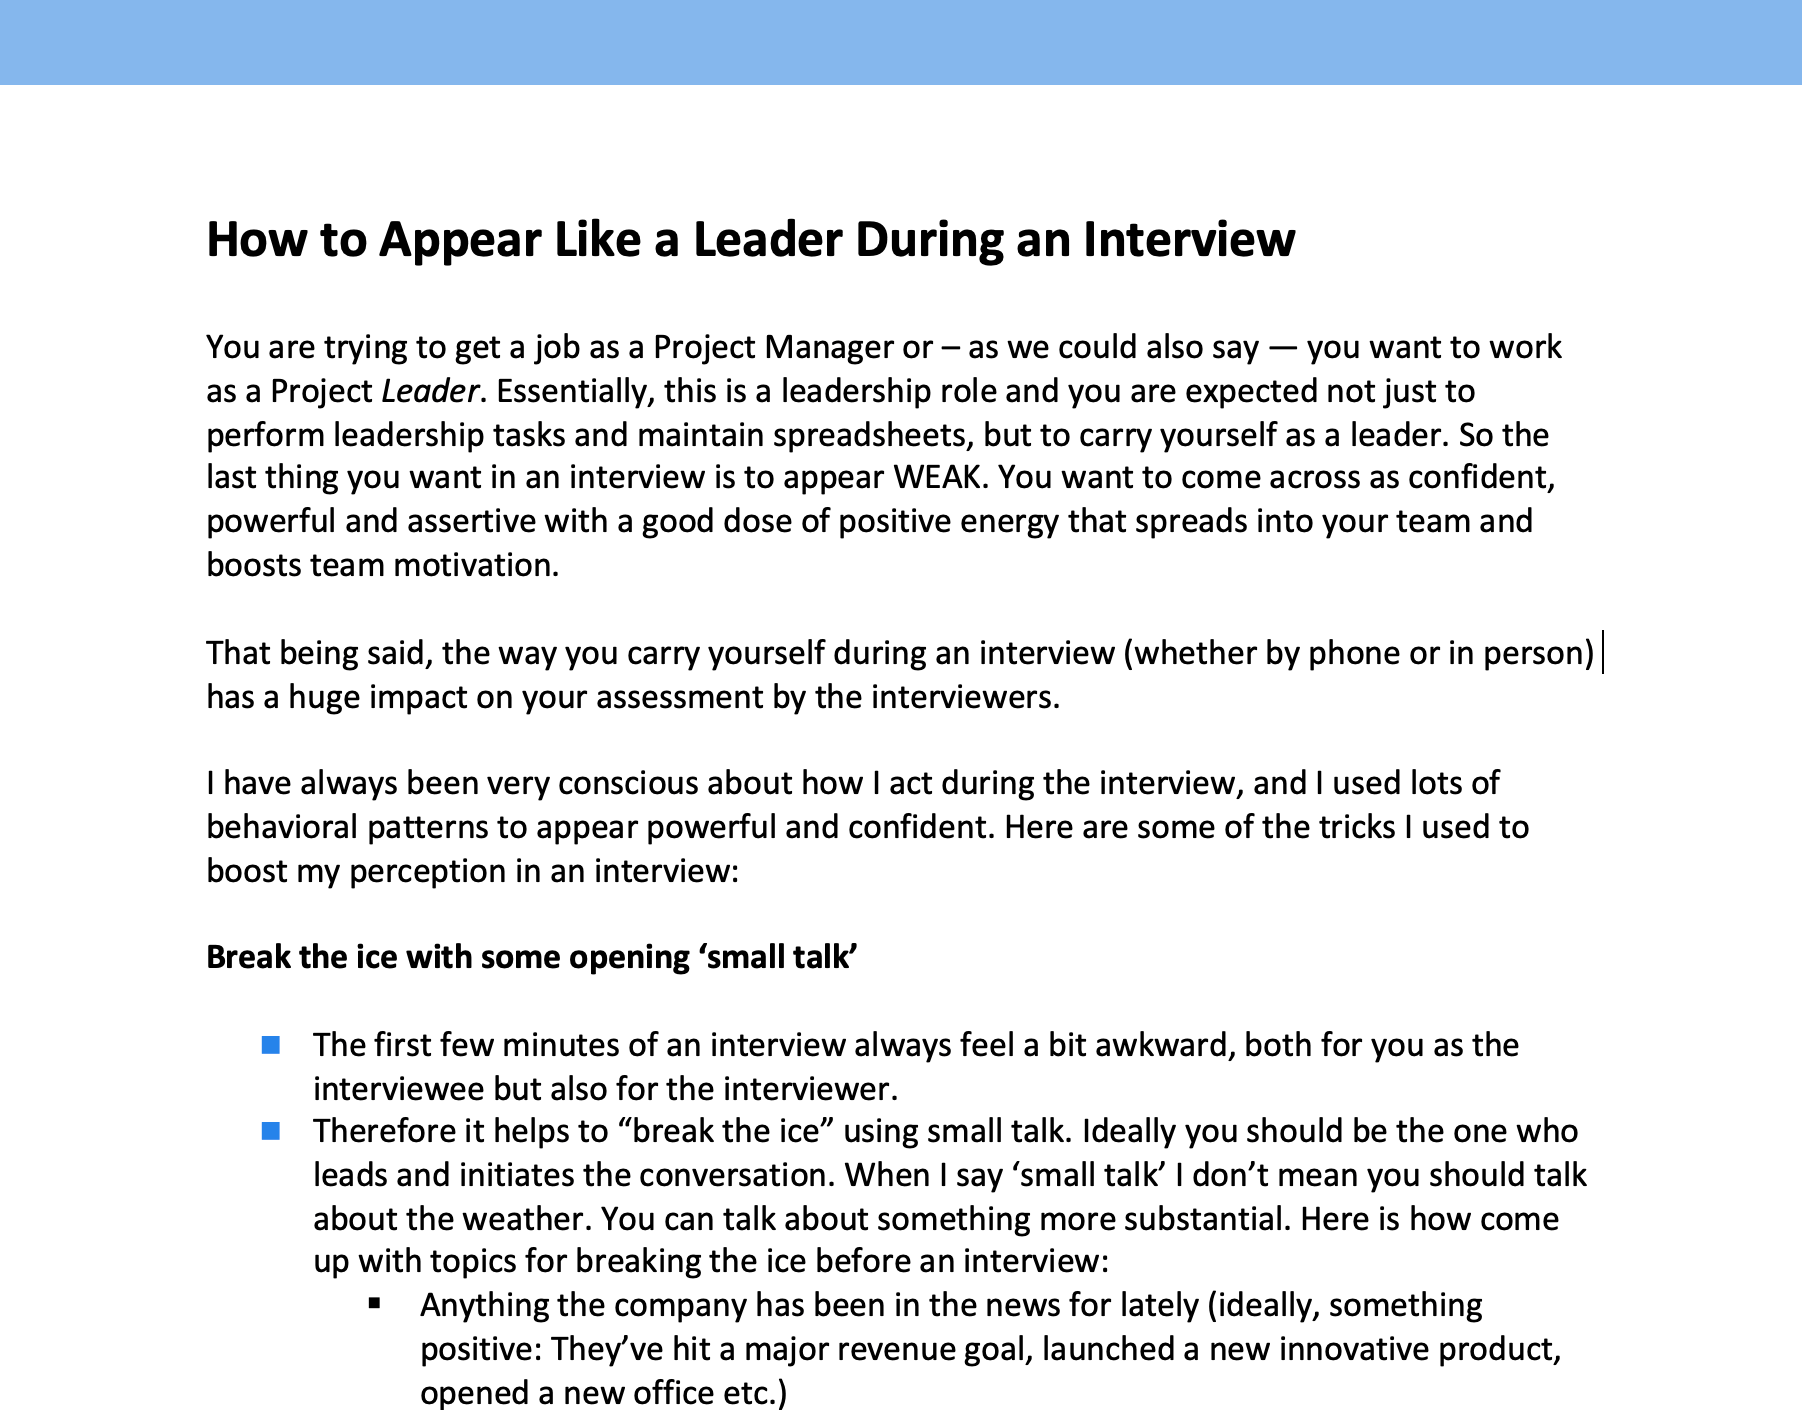 Screenshot from chapter 1 of the project management interview guide: this chapter teaches you how to act like a leader during the interview